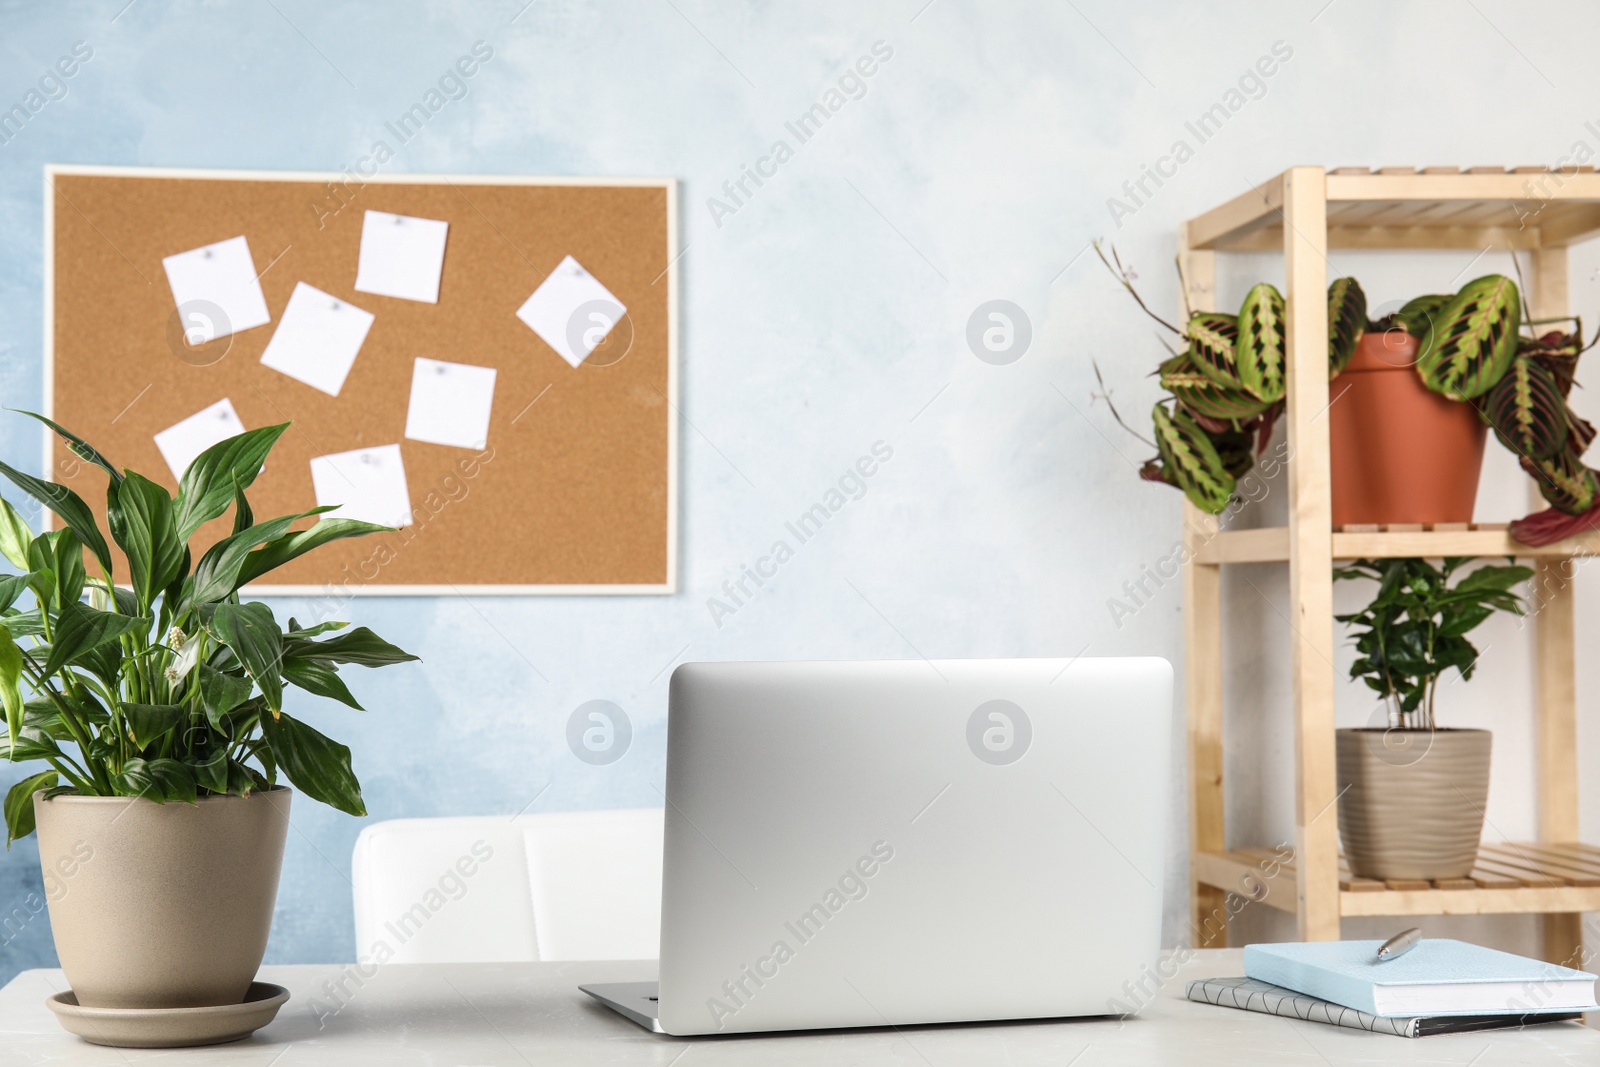 Photo of Office interior with houseplants and laptop on table